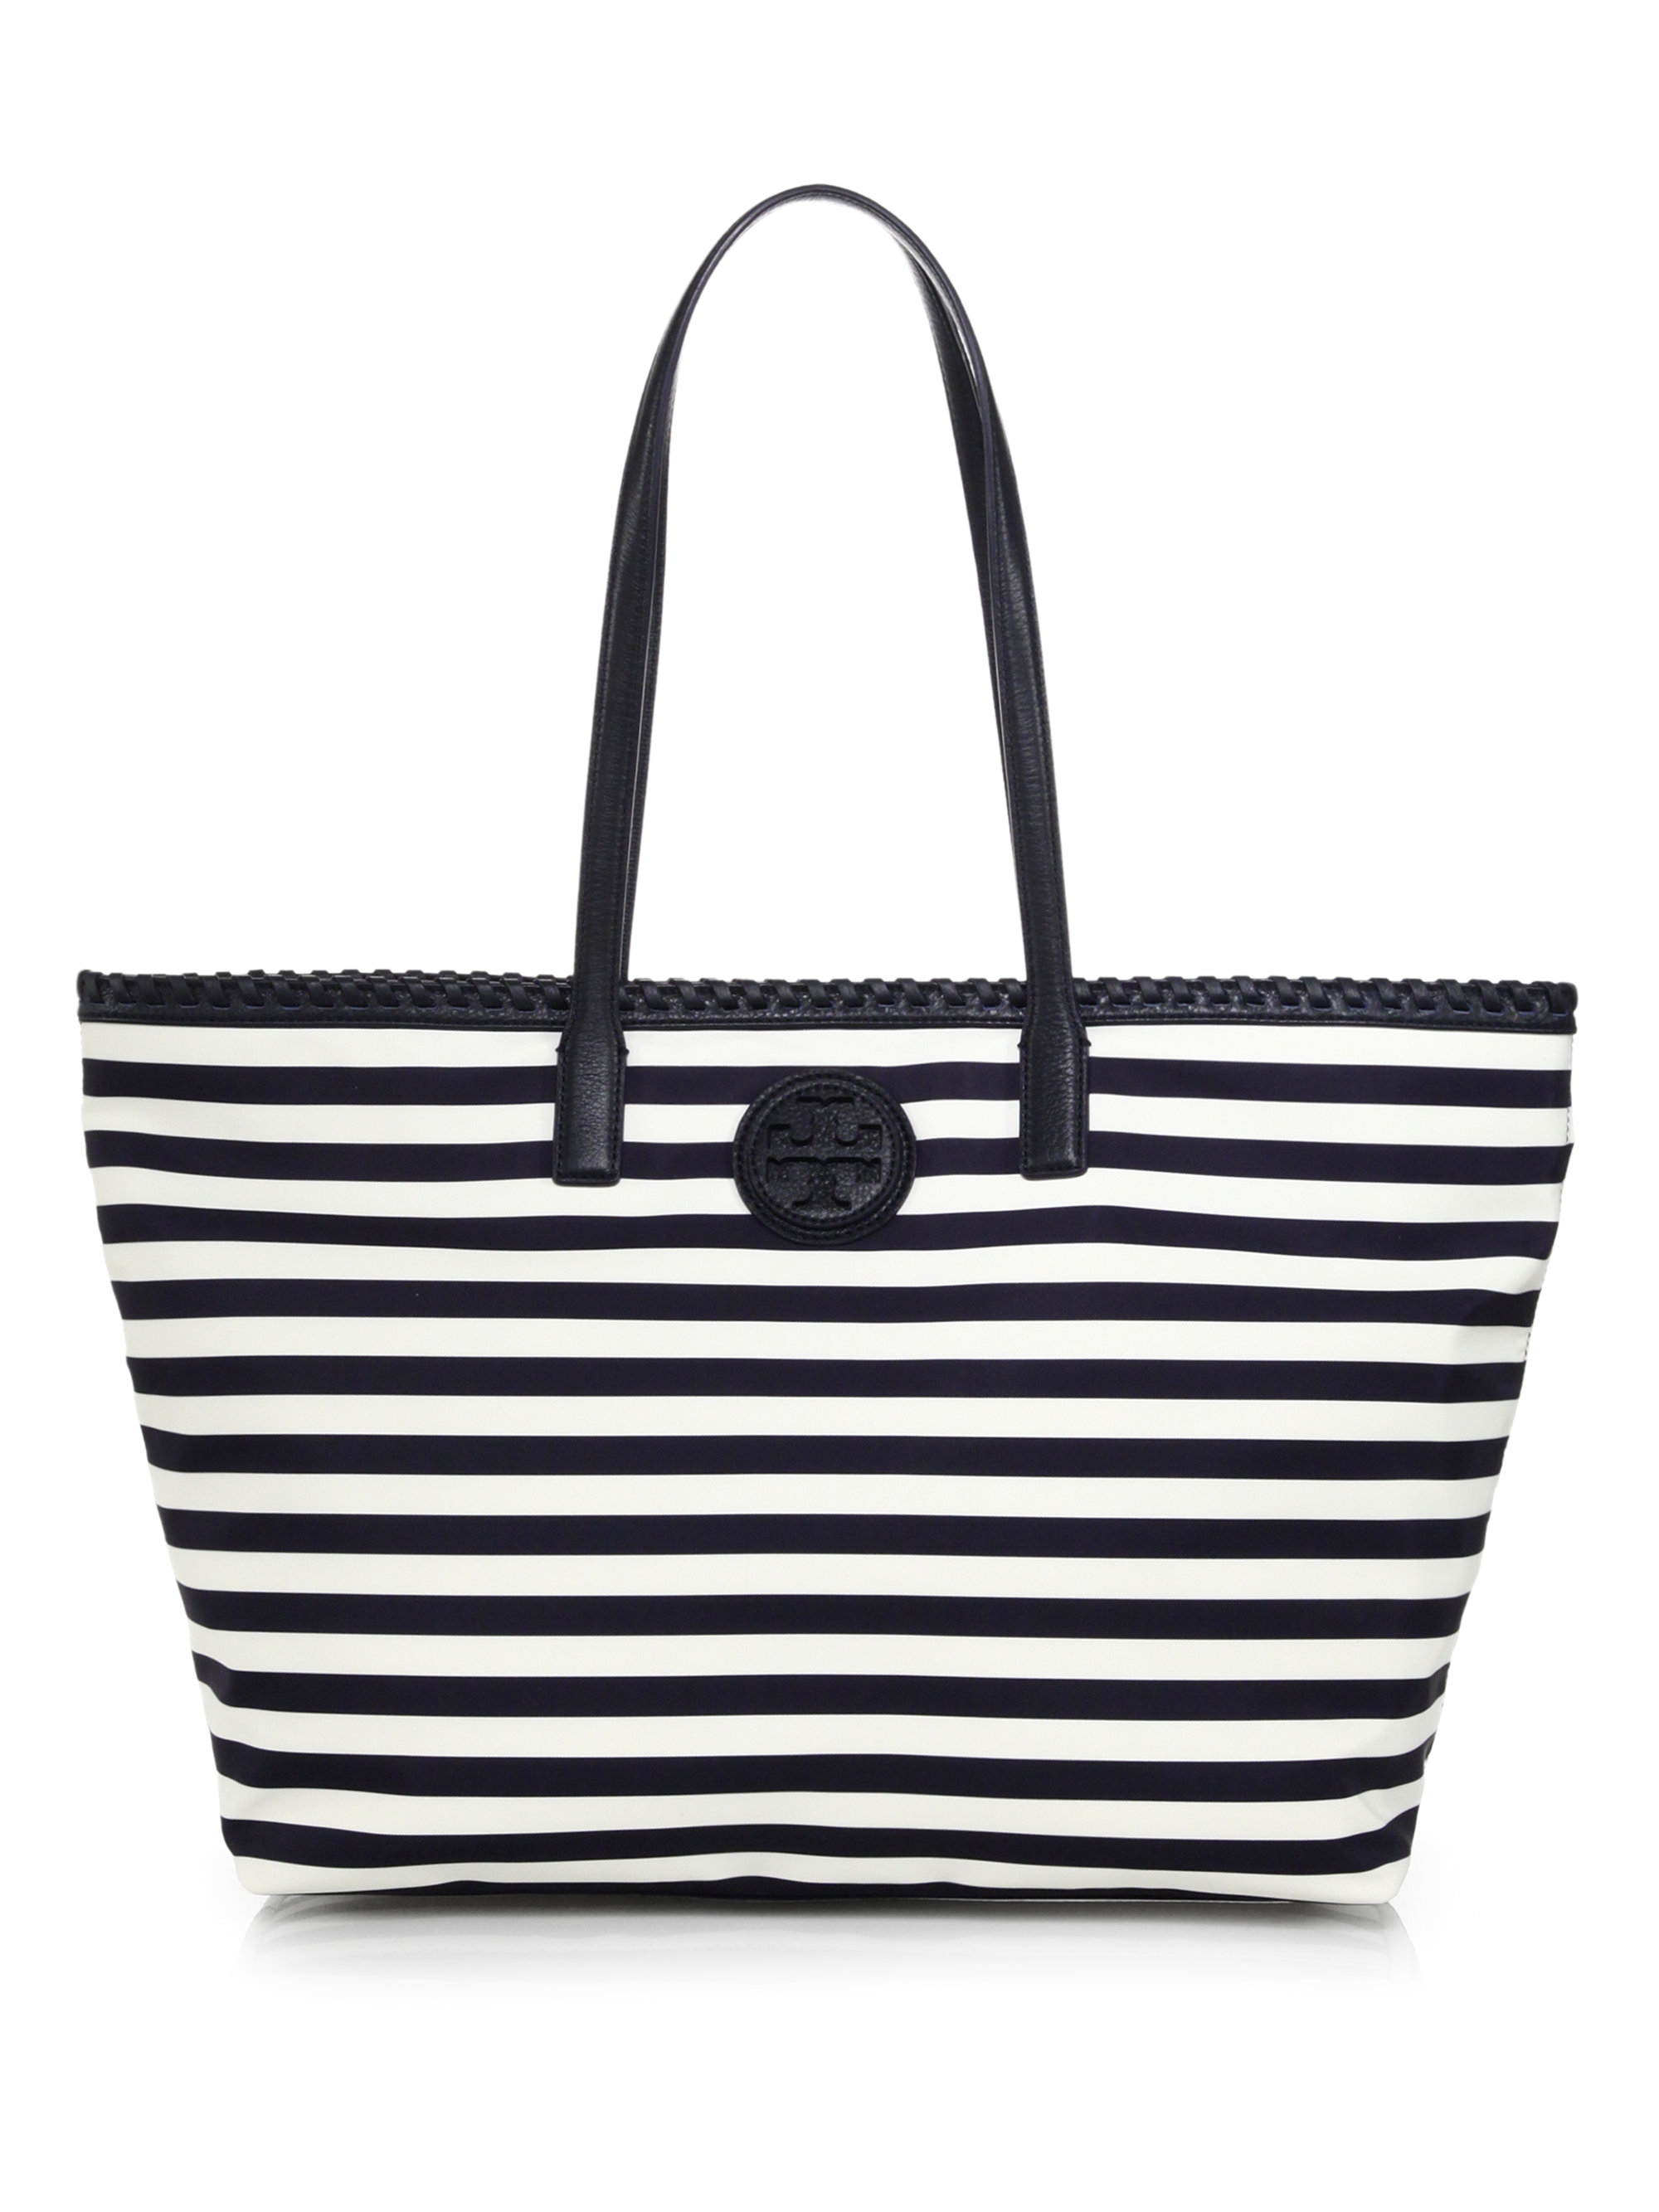 Lyst - Tory Burch Marion Striped East-West Nylon Tote in White